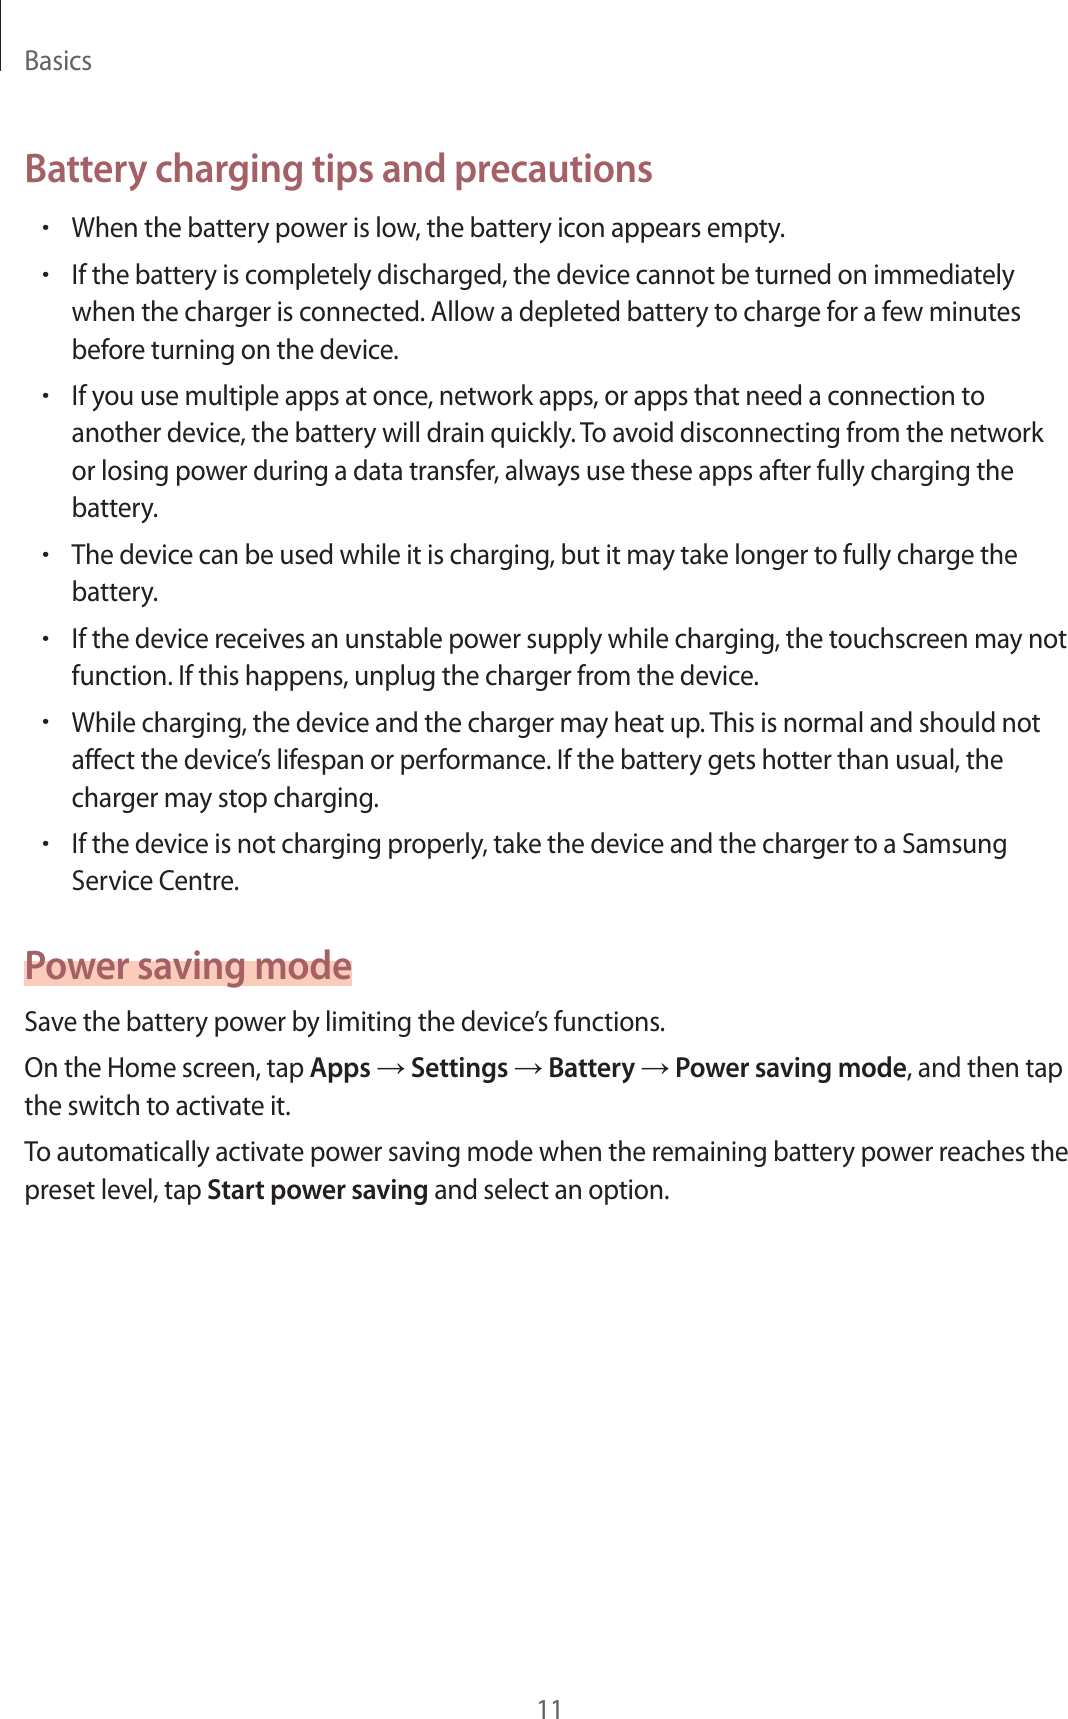 Basics11Battery charging tips and precautions•When the battery power is low, the battery icon appears empty.•If the battery is completely discharged, the device cannot be turned on immediately when the charger is connected. Allow a depleted battery to charge for a few minutes before turning on the device.•If you use multiple apps at once, network apps, or apps that need a connection to another device, the battery will drain quickly. To avoid disconnecting from the network or losing power during a data transfer, always use these apps after fully charging the battery.•The device can be used while it is charging, but it may take longer to fully charge the battery.•If the device receives an unstable power supply while charging, the touchscreen may not function. If this happens, unplug the charger from the device.•While charging, the device and the charger may heat up. This is normal and should not affect the device’s lifespan or performance. If the battery gets hotter than usual, the charger may stop charging.•If the device is not charging properly, take the device and the charger to a Samsung Service Centre.Power saving modeSave the battery power by limiting the device’s functions.On the Home screen, tap Apps → Settings → Battery → Power saving mode, and then tap the switch to activate it.To automatically activate power saving mode when the remaining battery power reaches the preset level, tap Start power saving and select an option.